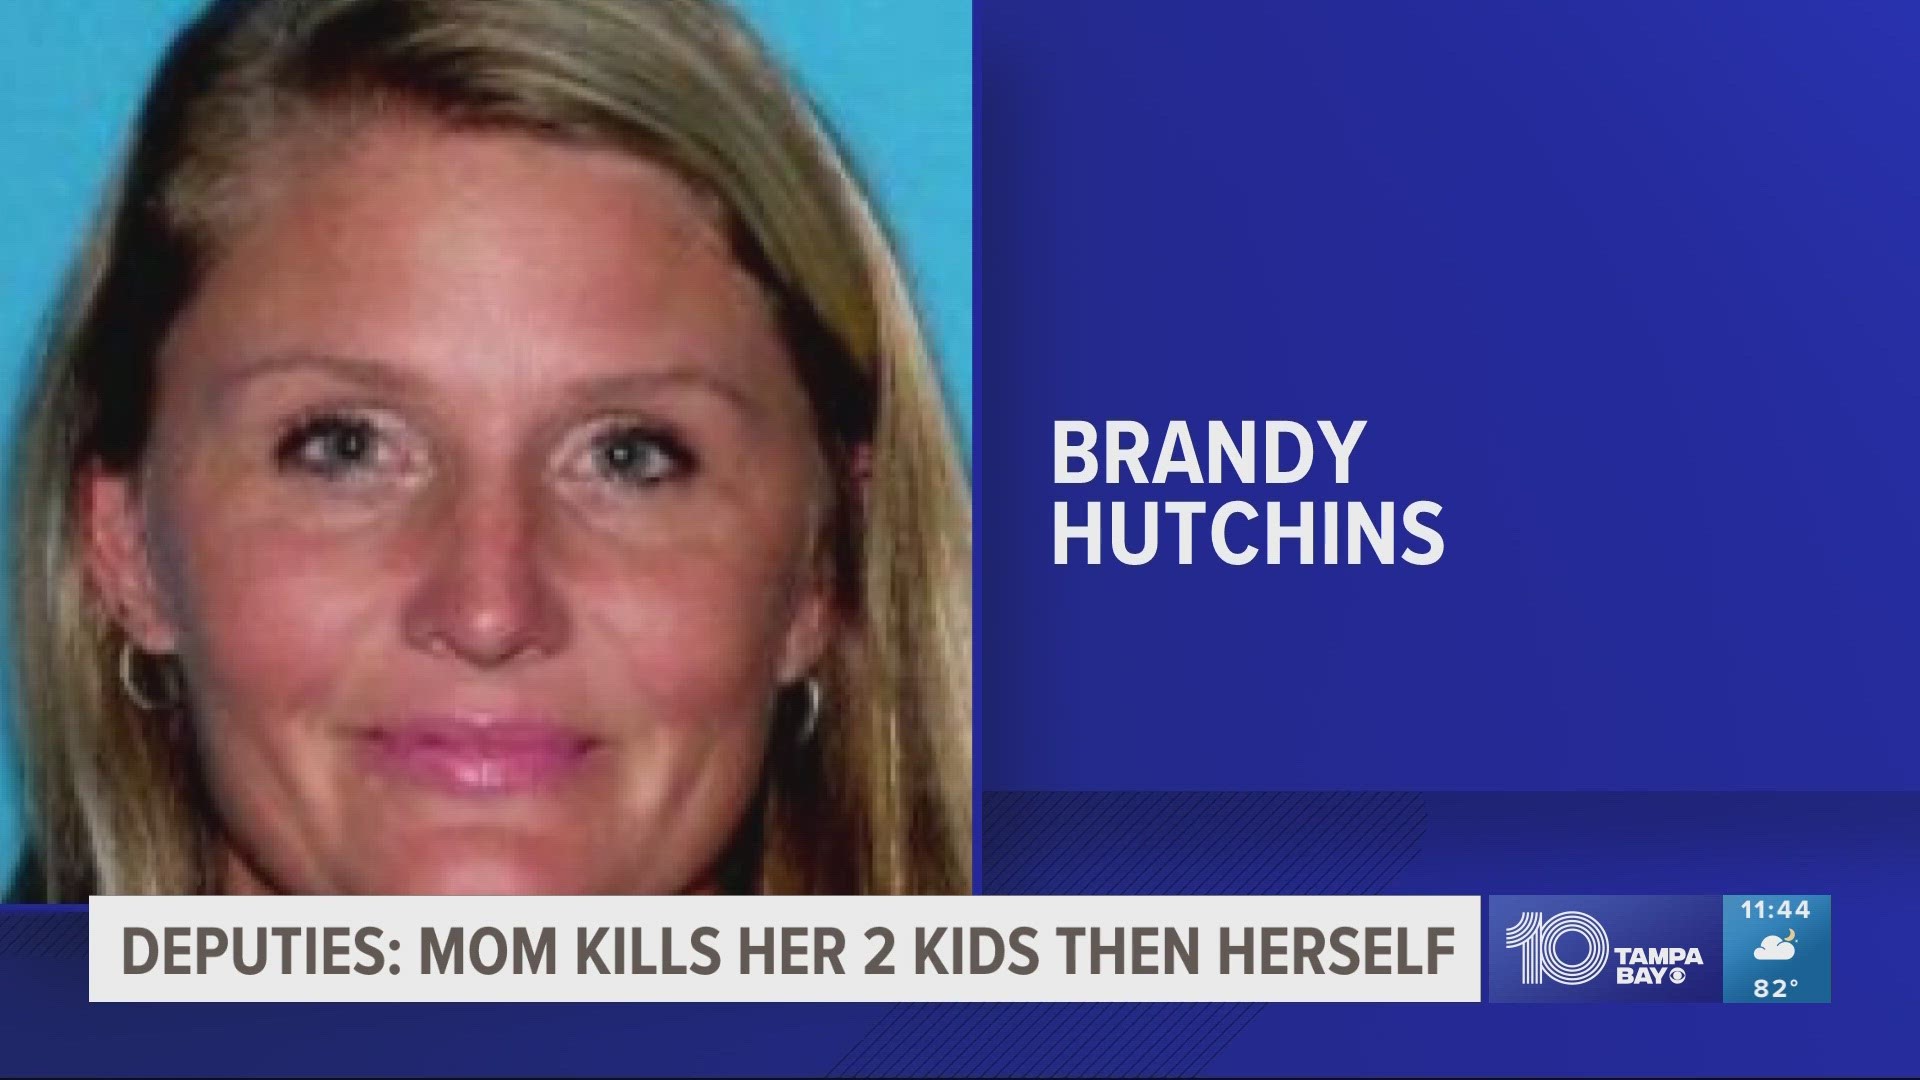 Brandy Hutchins, 43, refused to turn over her 10-year-old son to her ex-husband due to custody reasons, officials say.